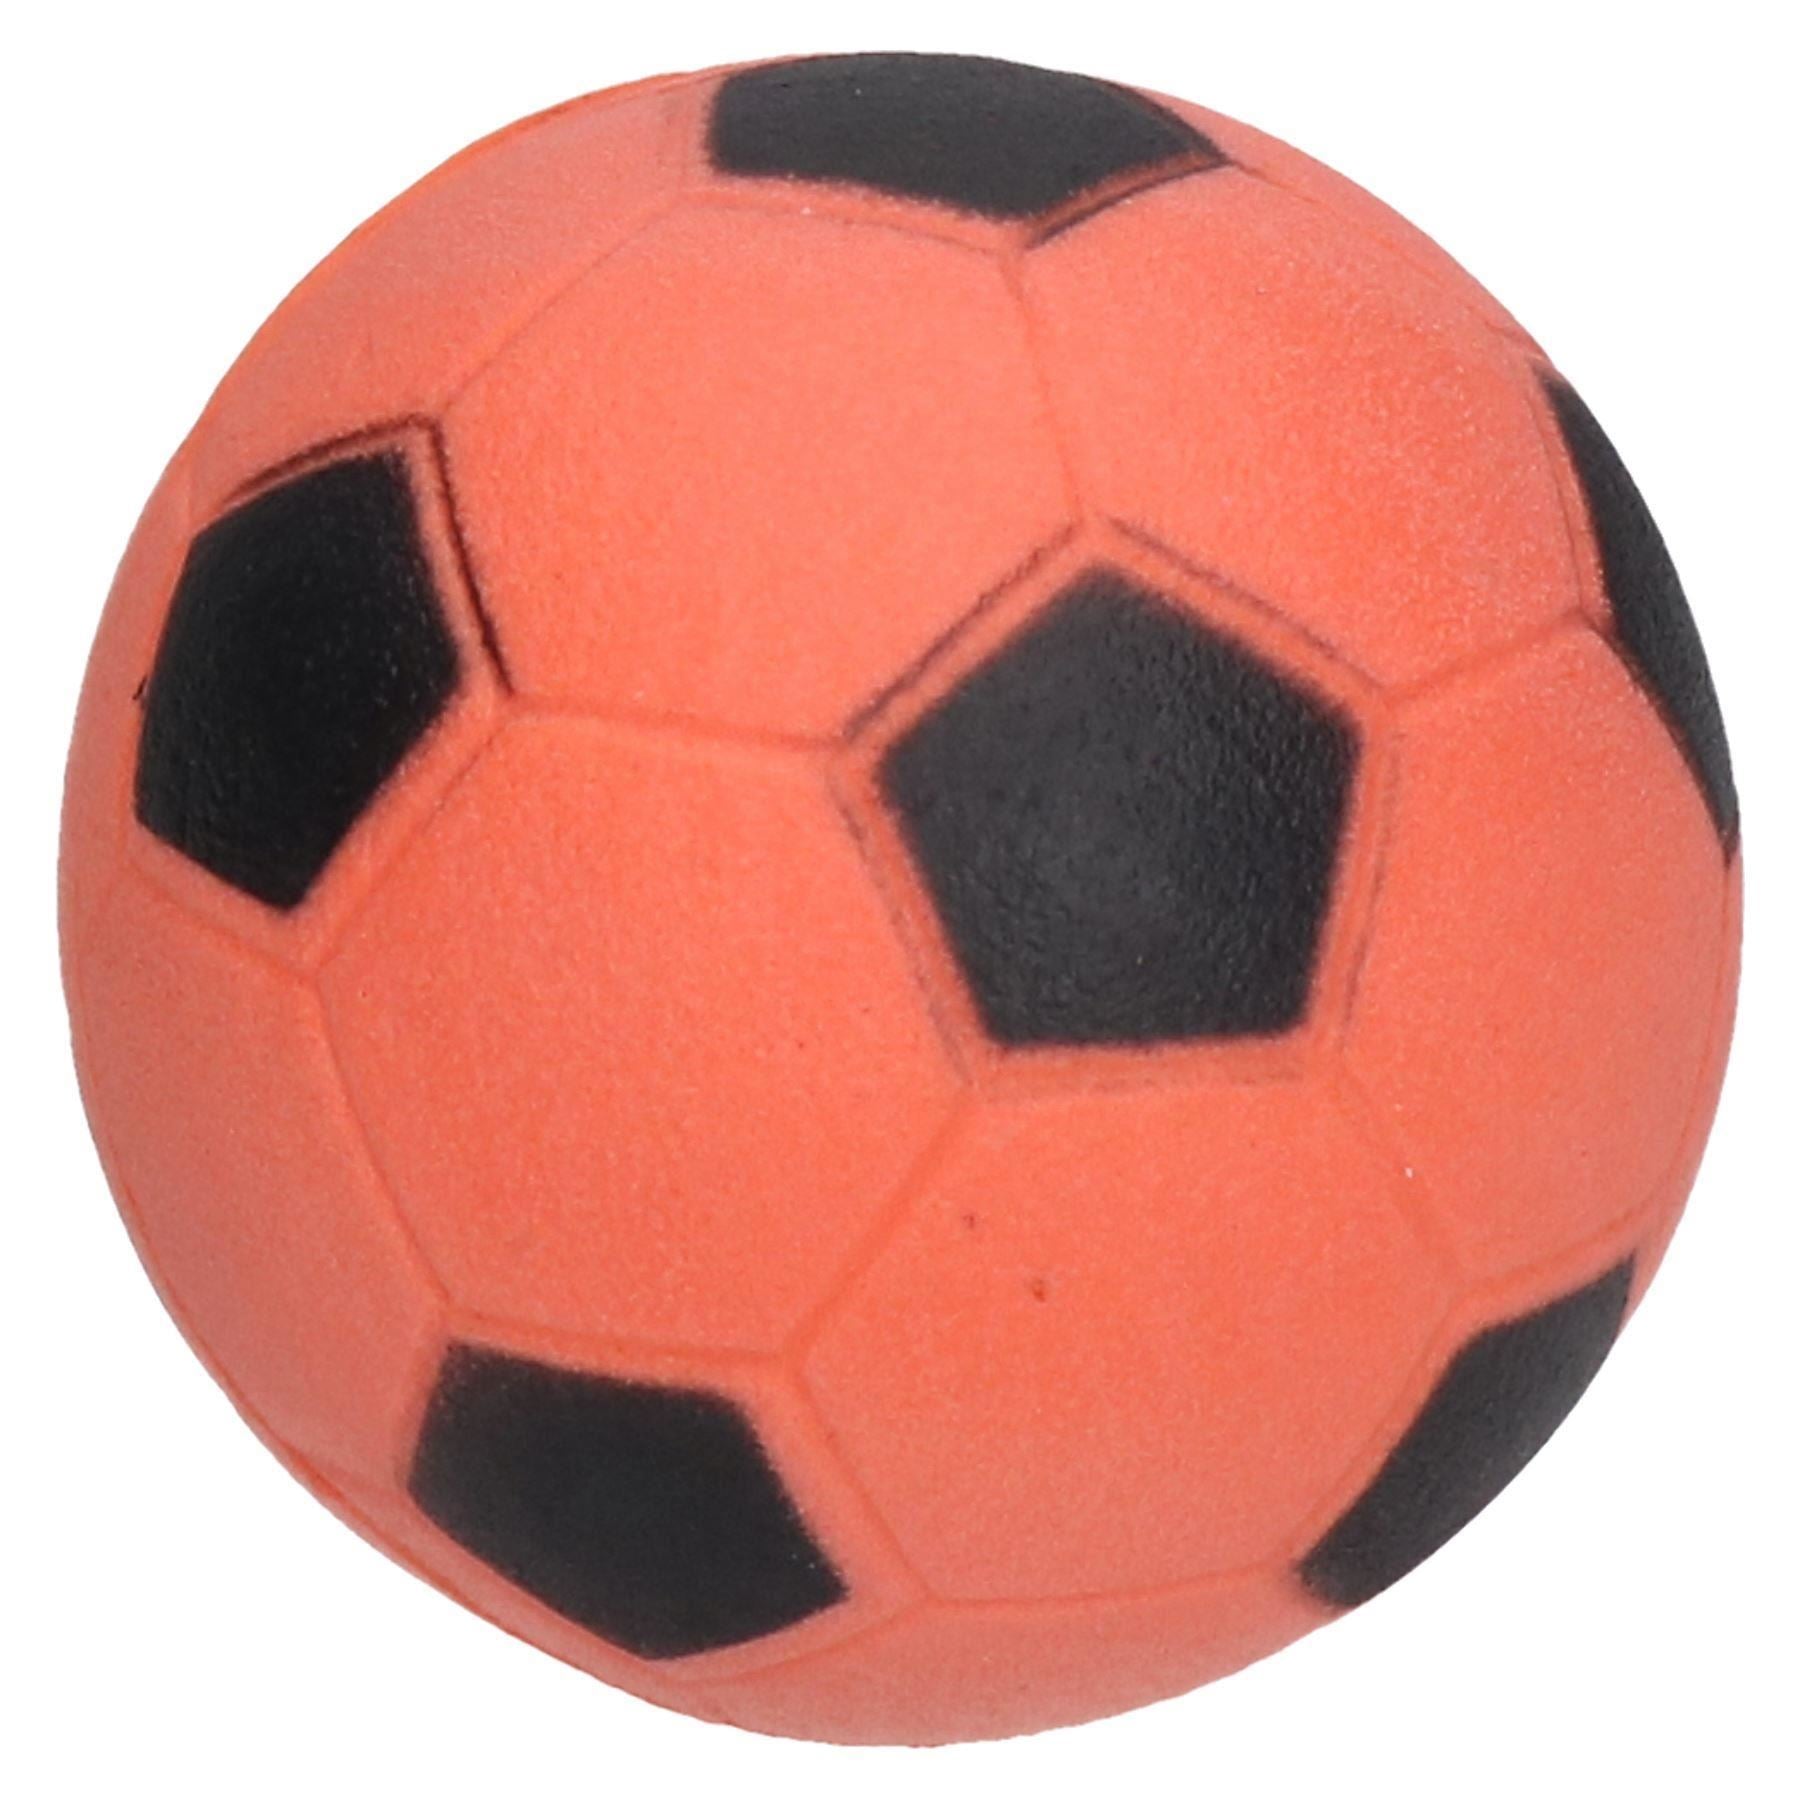 Puppy Dog Play Time Rubber Bouncy Sports Ball